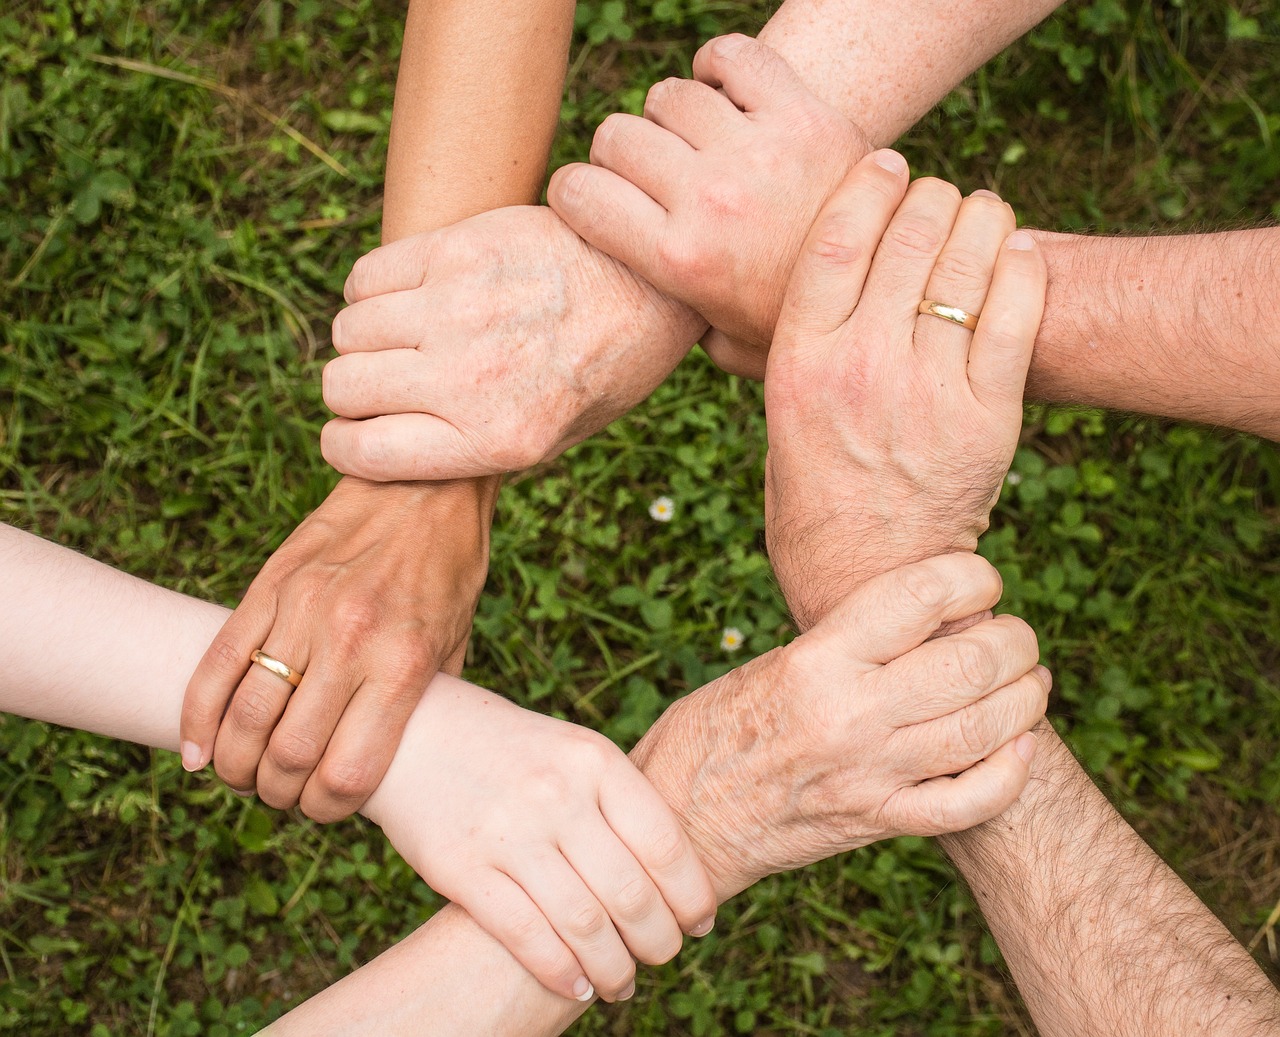 A group of people holding each other's wrists.